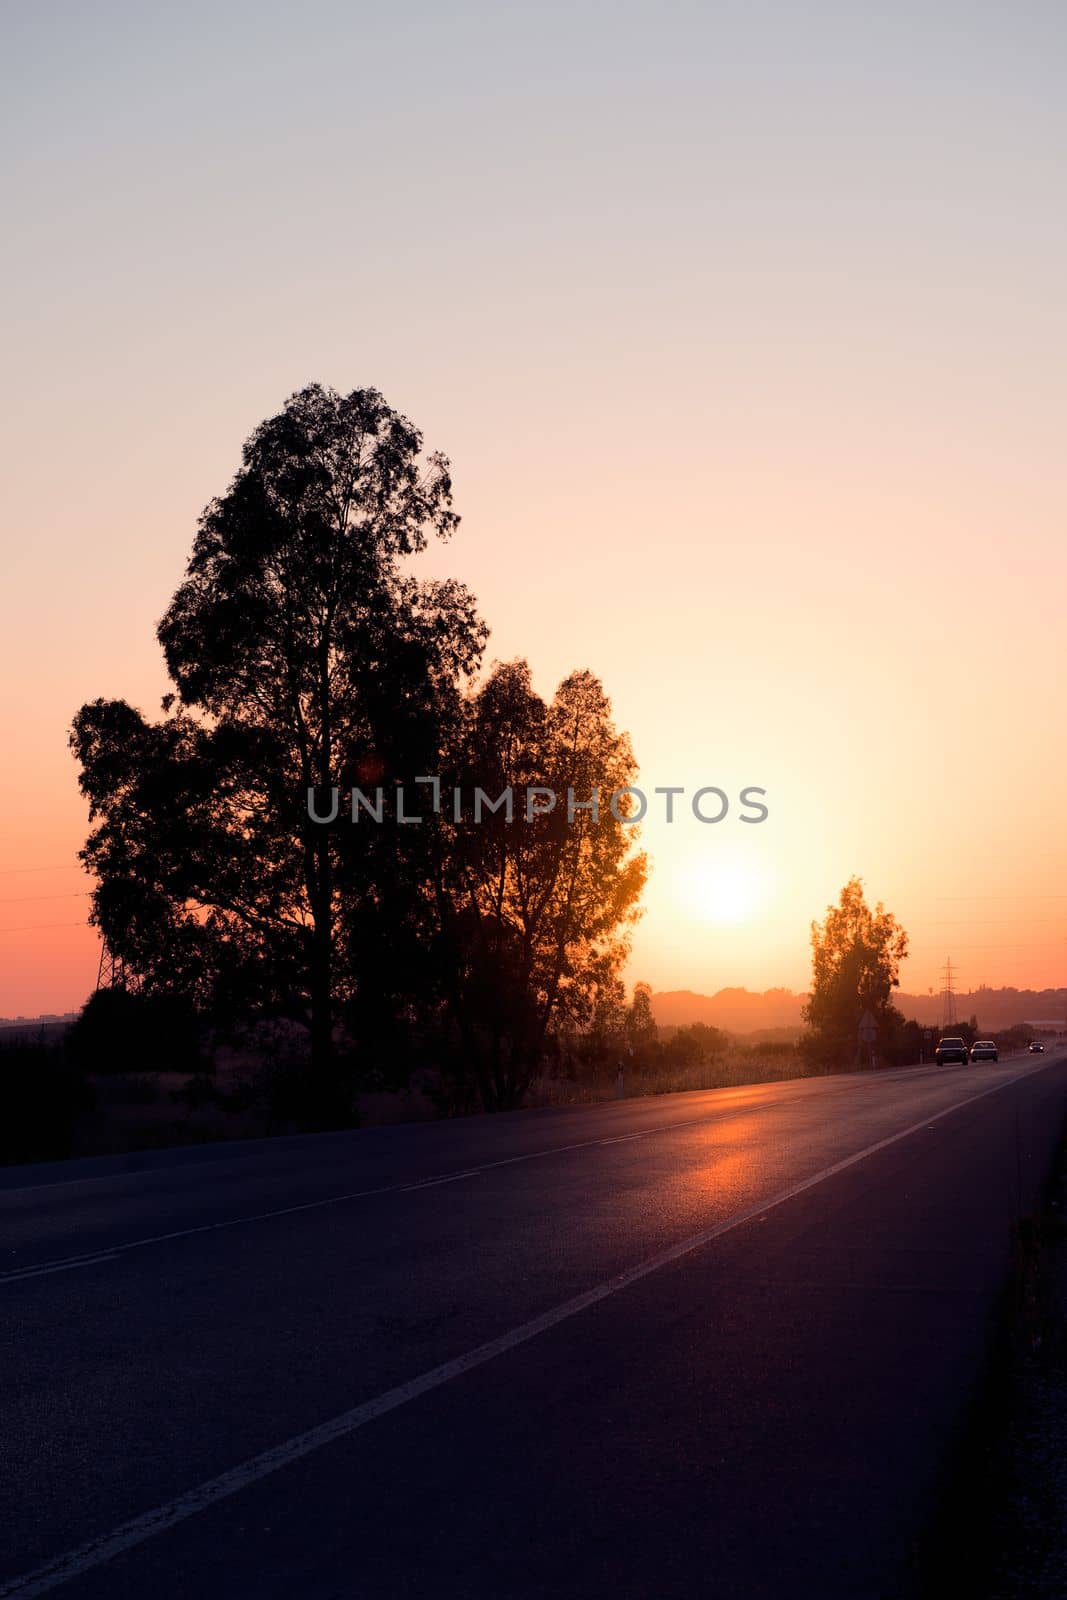 Sunlight is reflected at sunset on a county road, the trees in the ditch are seen in silhouette and in the distance you can see a car circulating on the asphalt